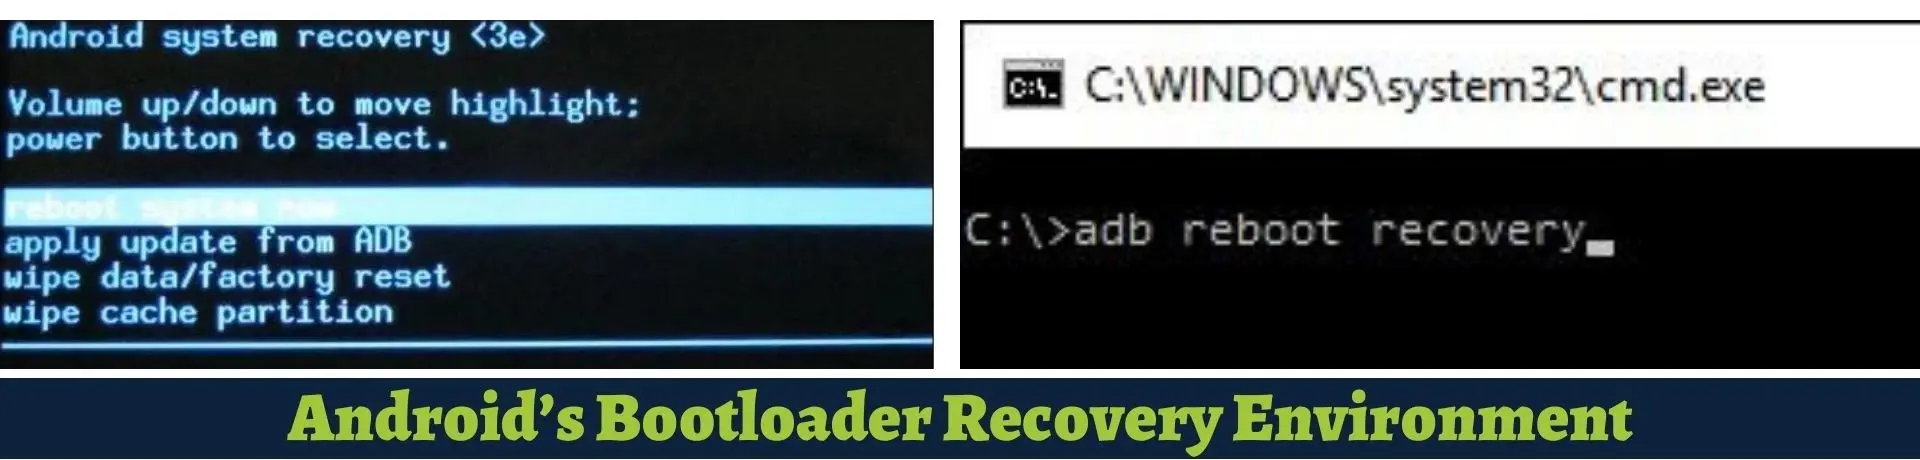 android recovary-environment.